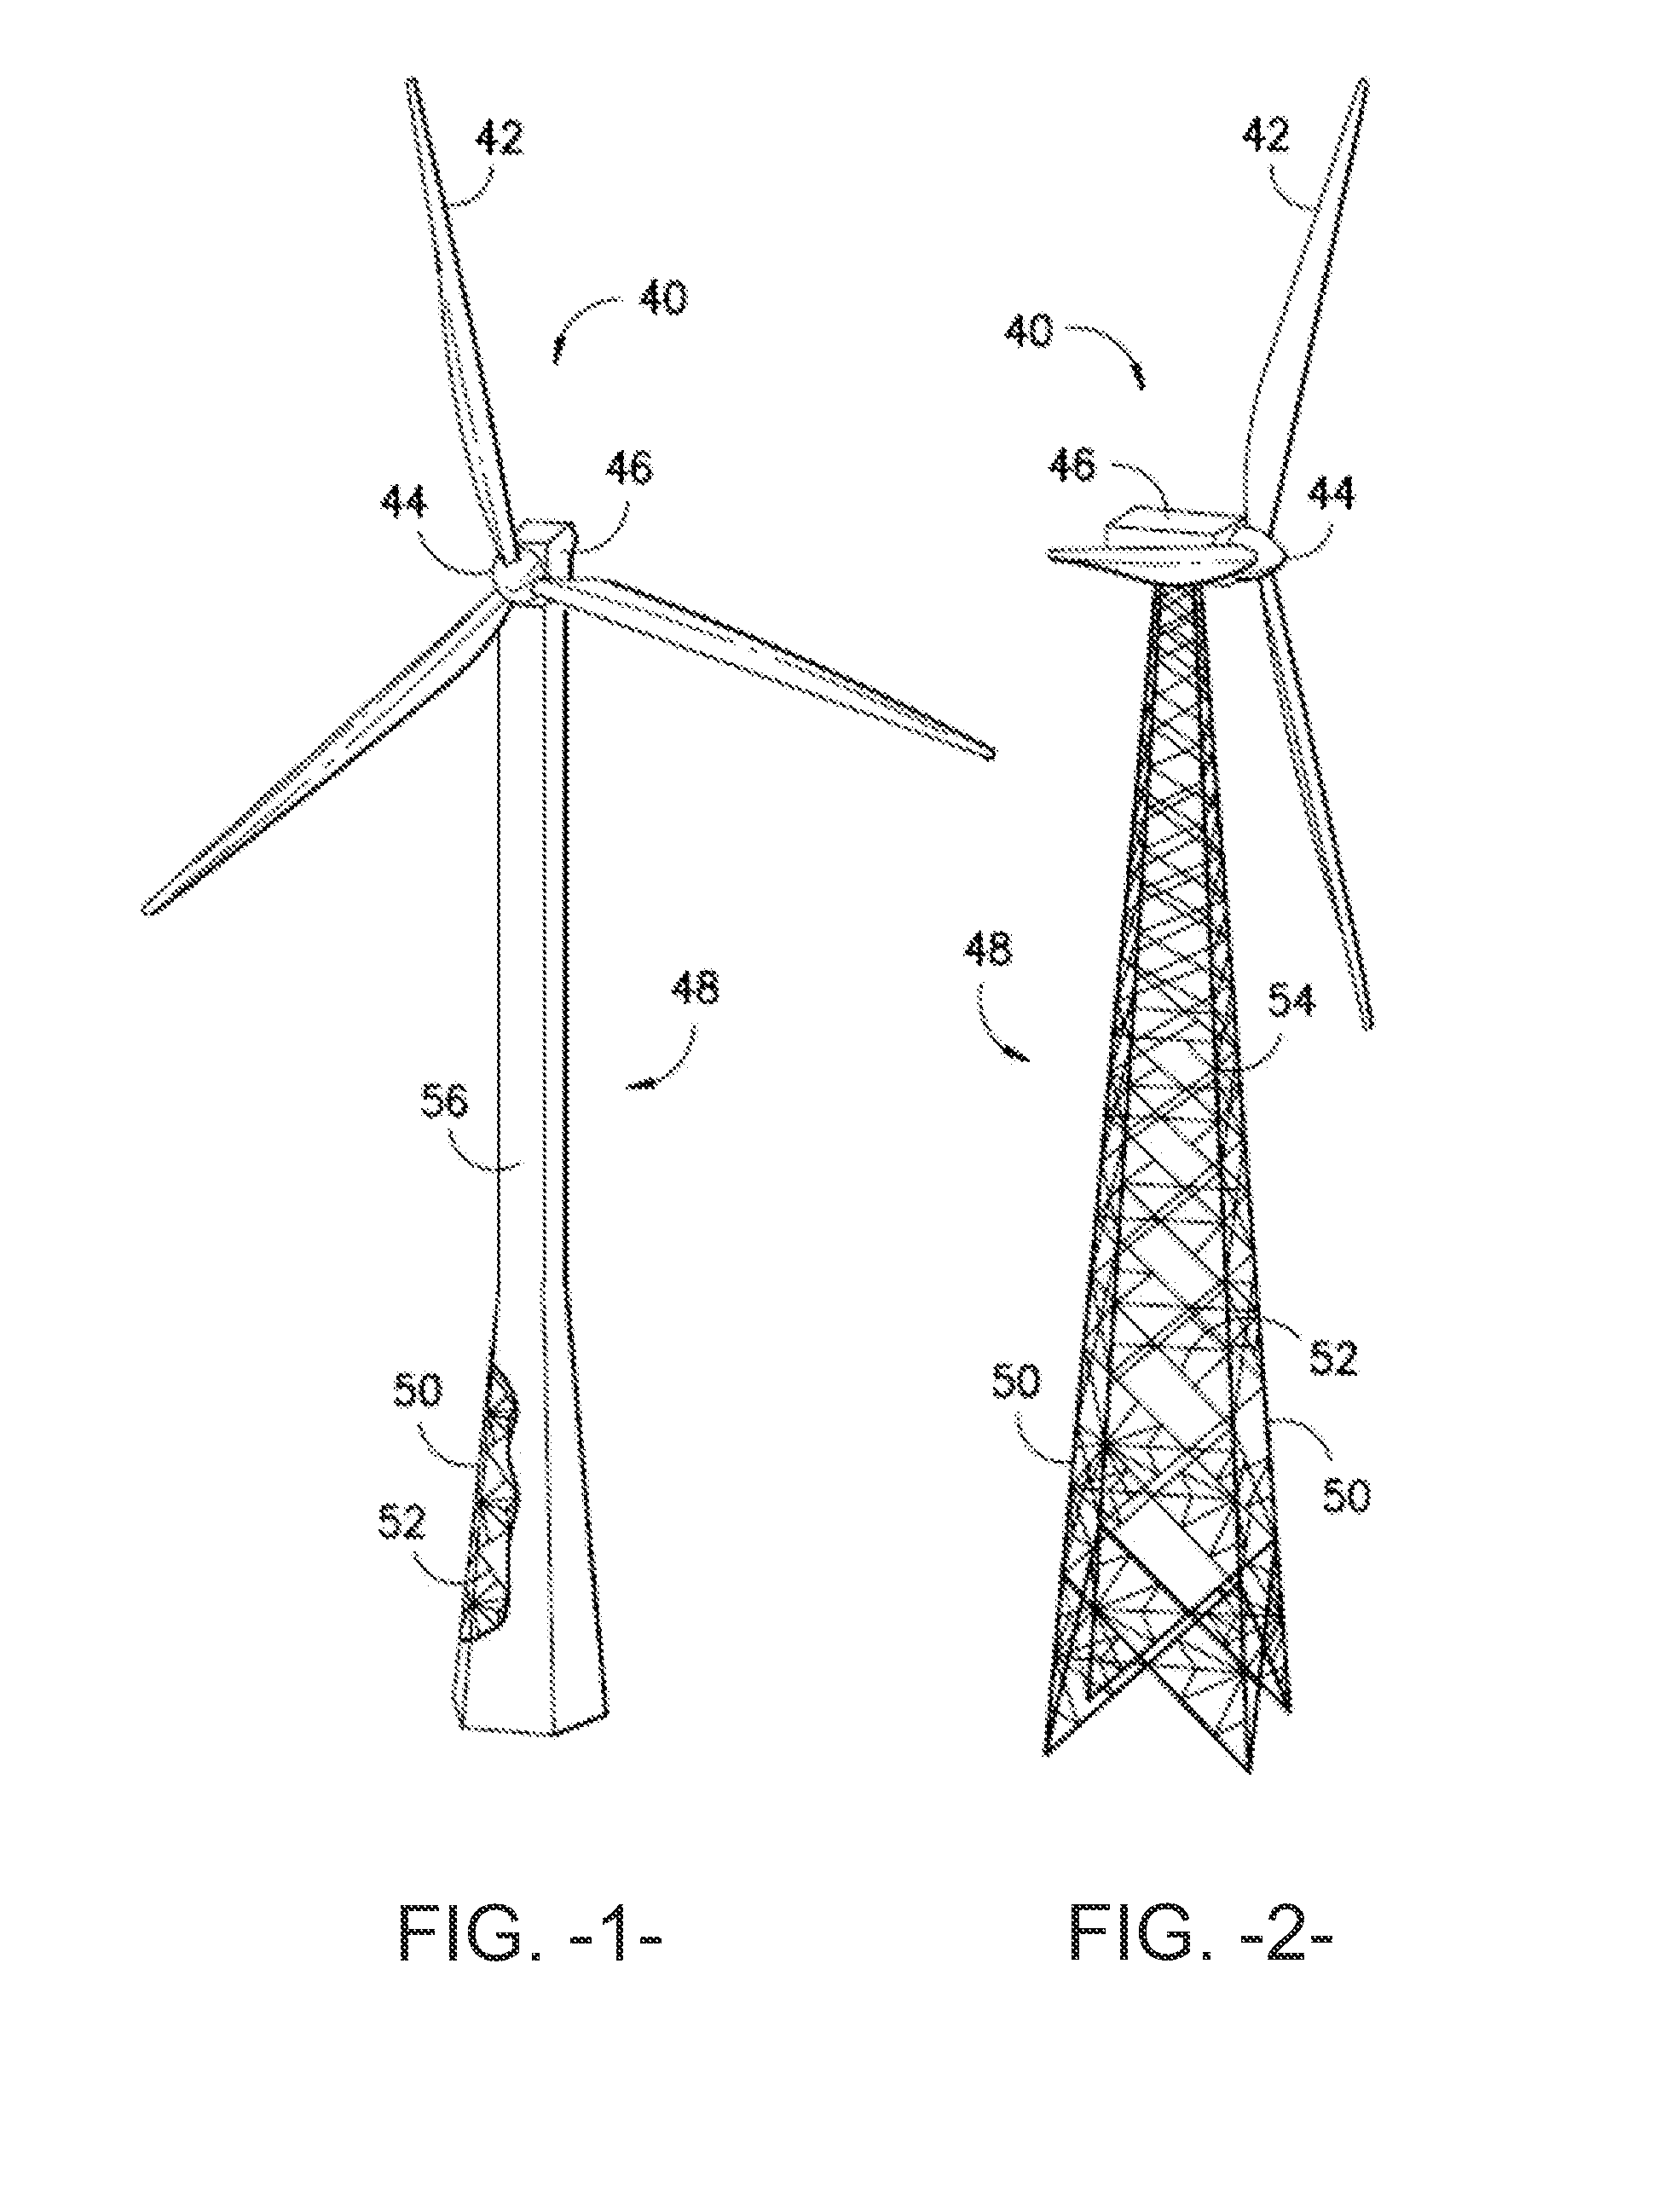 Bolt connection assembly for a wind turbine lattice tower structure